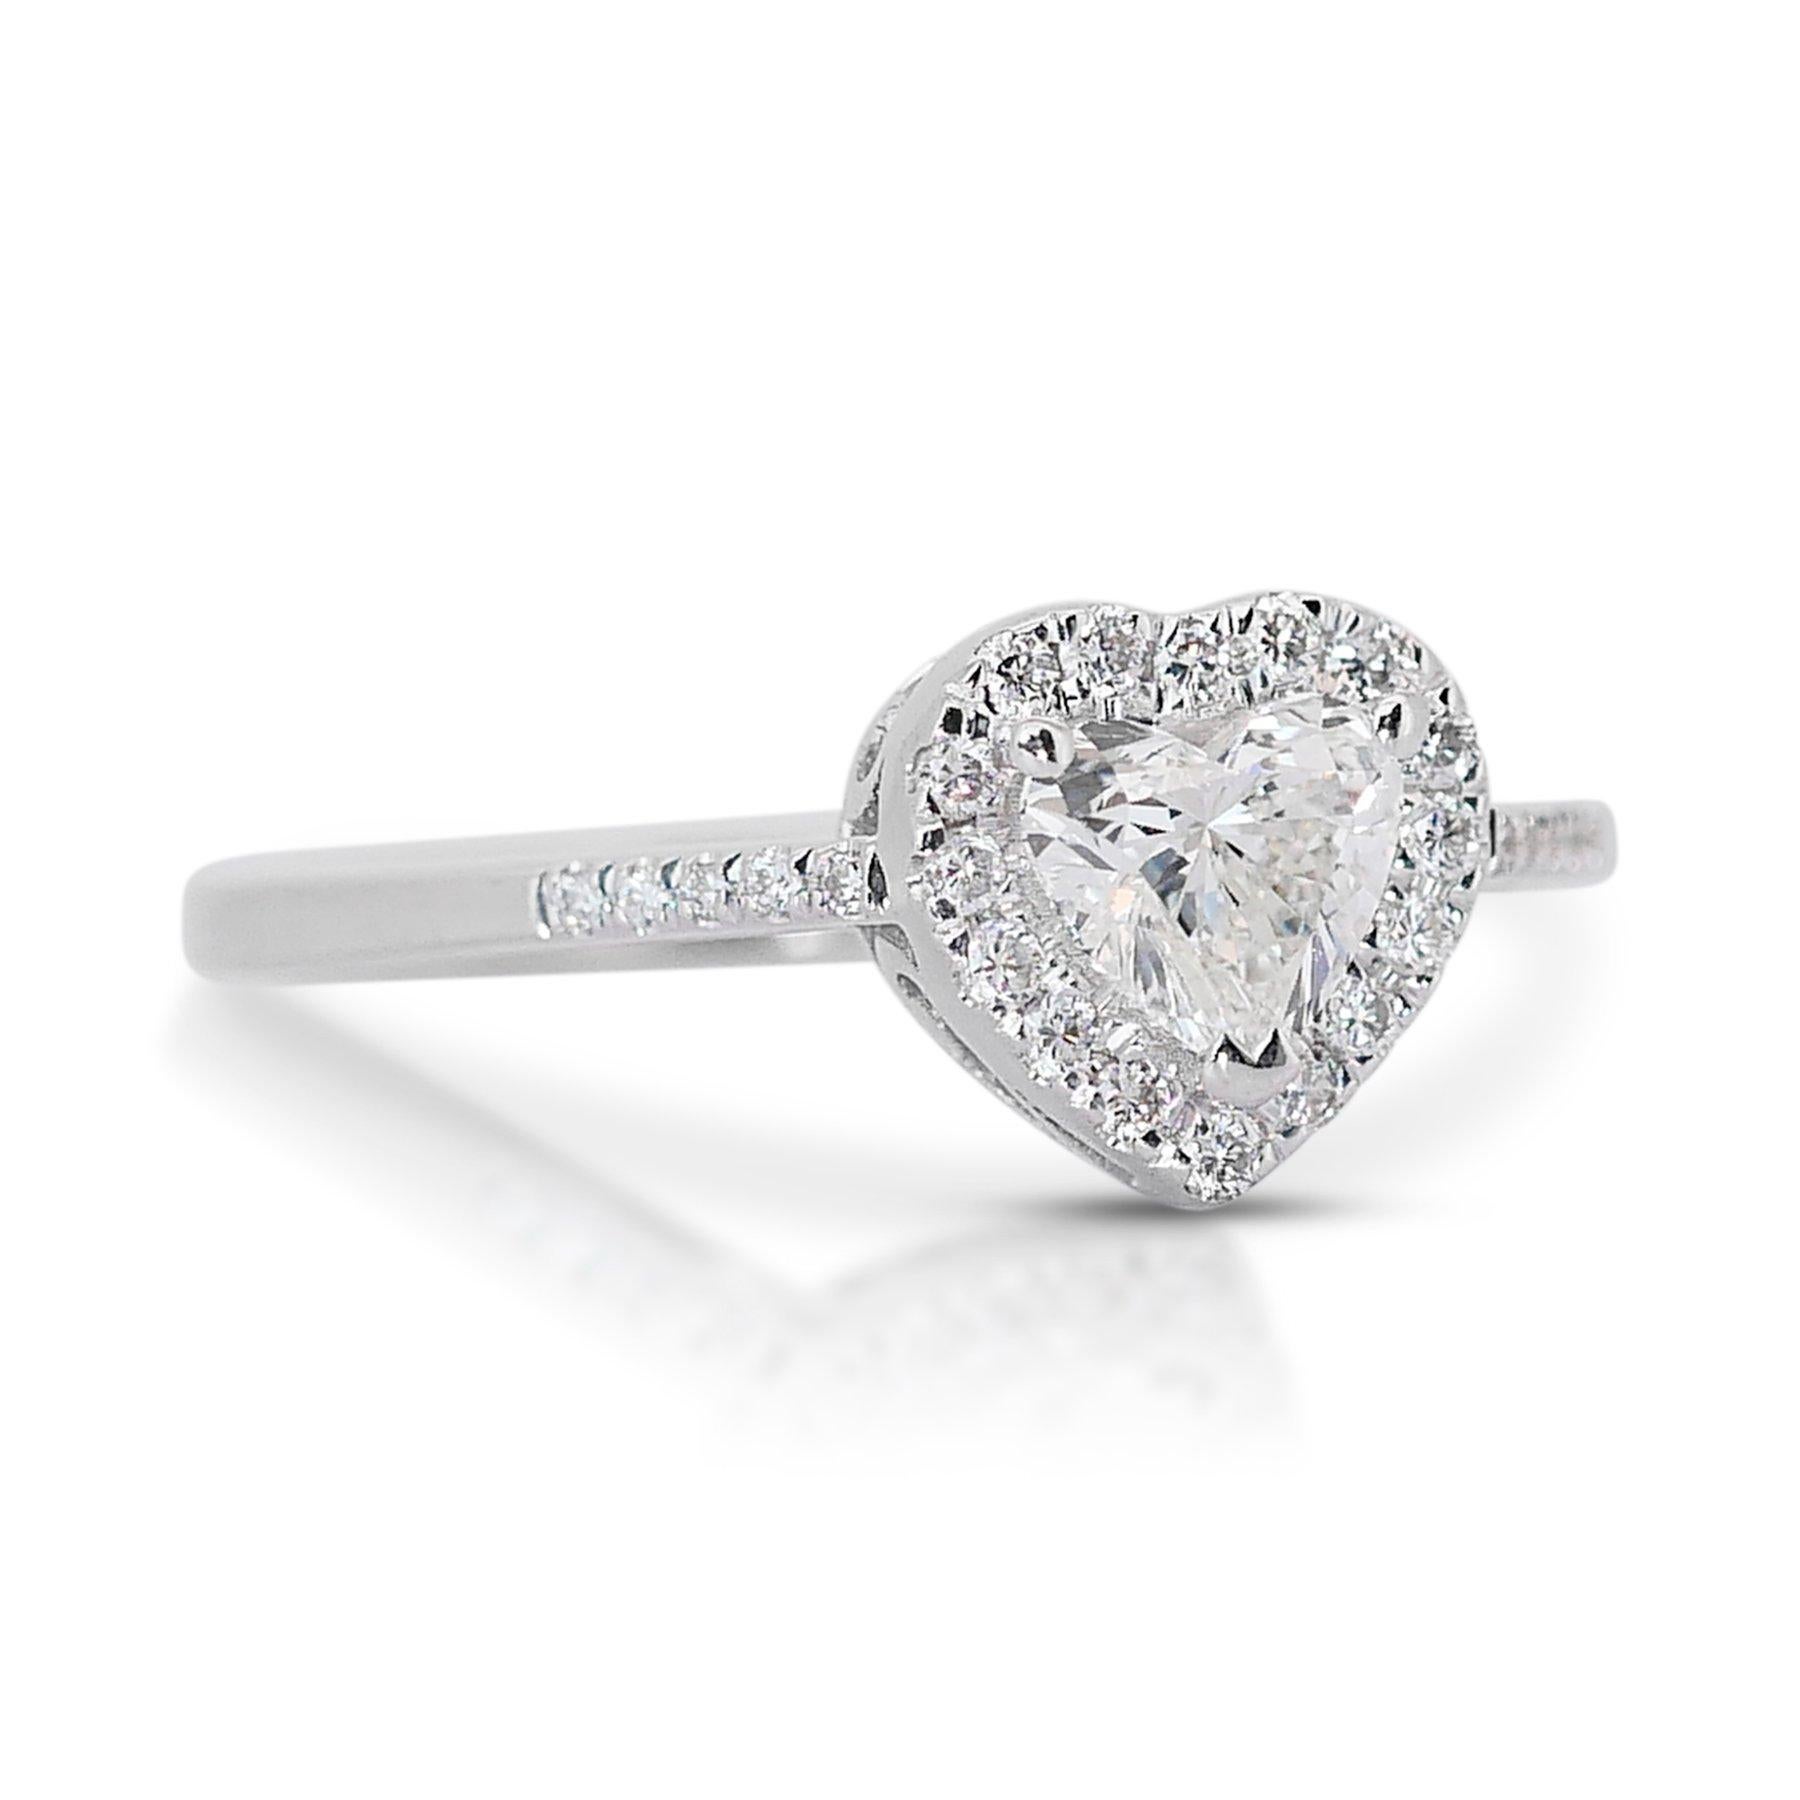 Charming 0.75ct Diamonds Halo Ring in 18k White Gold - IGI Certified

This enchanting halo ring features a main heart-shaped diamond weighing 0.55 carats. Surrounding the central diamond are 26 round diamonds that collectively weigh 0.20 carats.